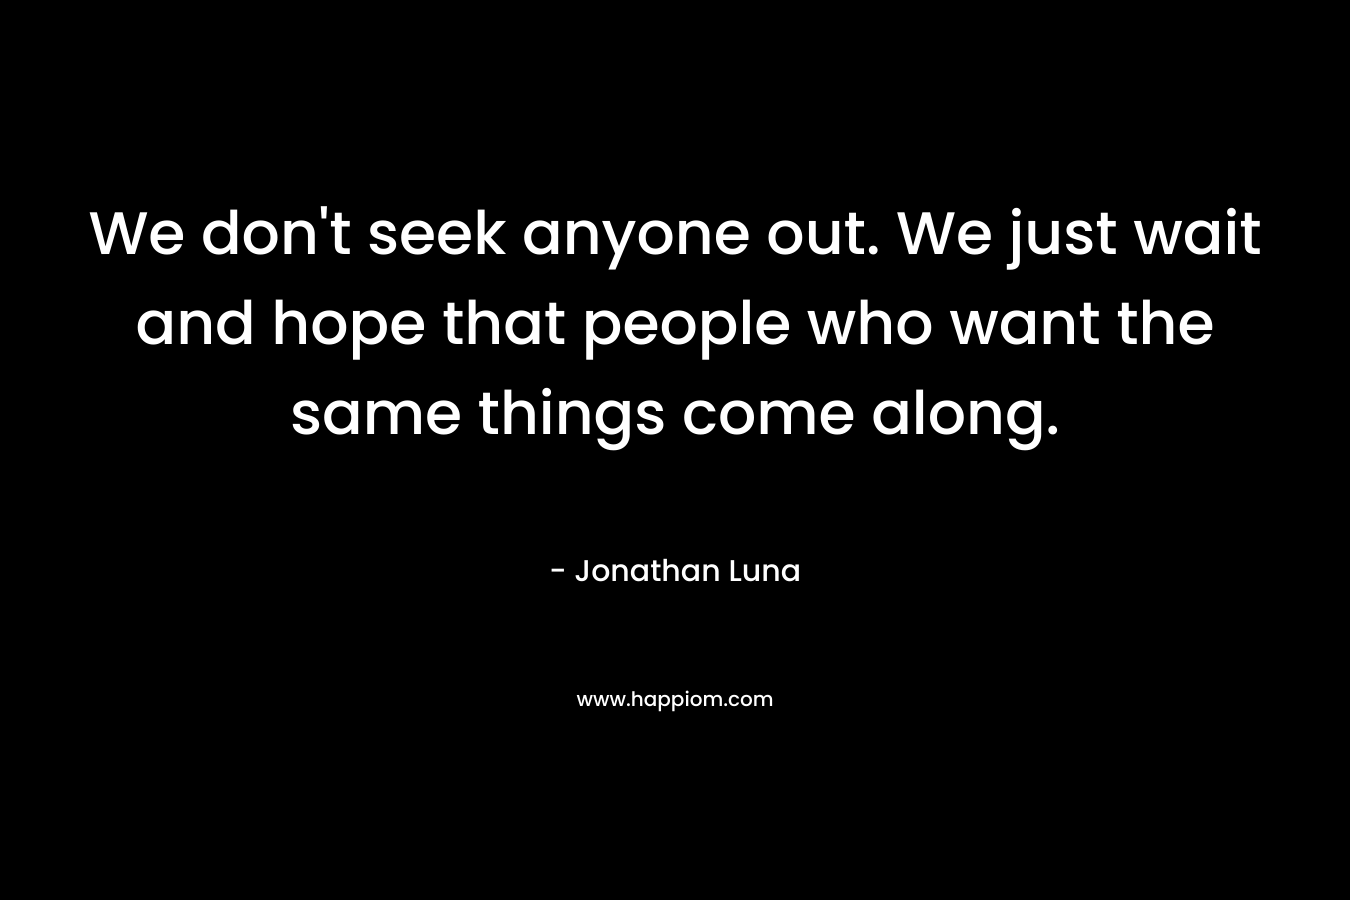 We don't seek anyone out. We just wait and hope that people who want the same things come along.